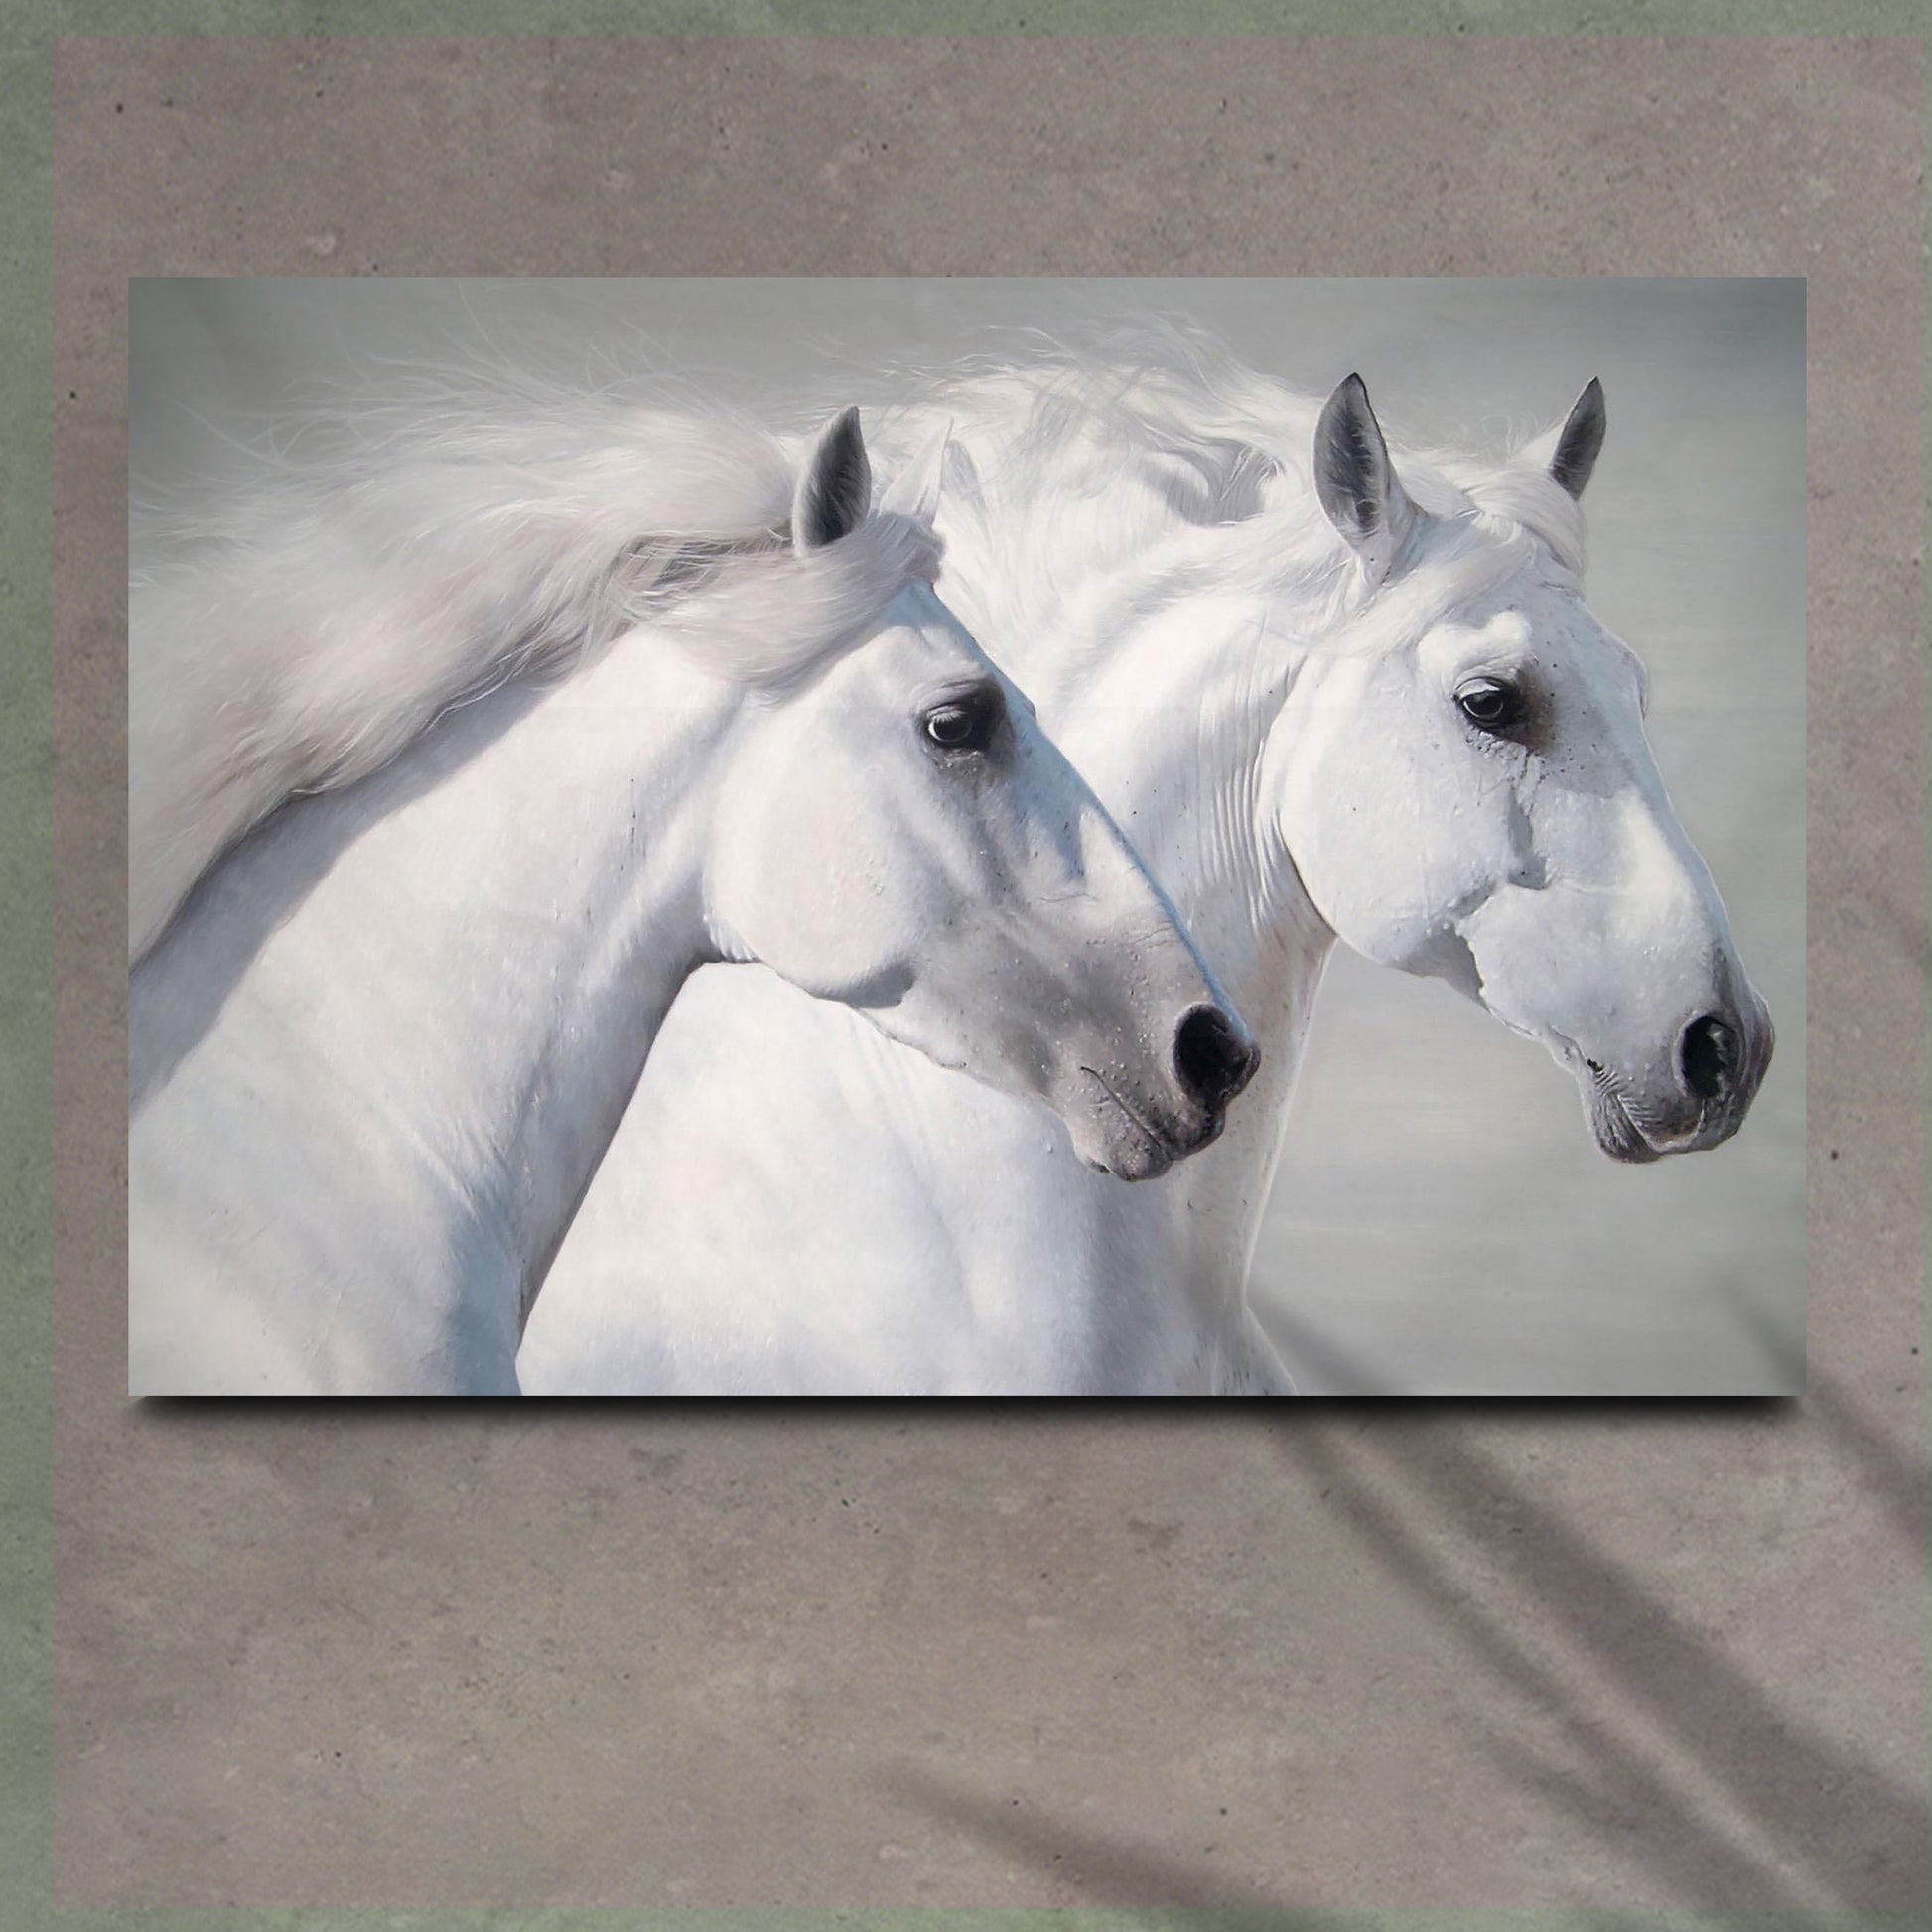 Galloping White Horses Canvas Wall Art - Image by Tailored Canvases